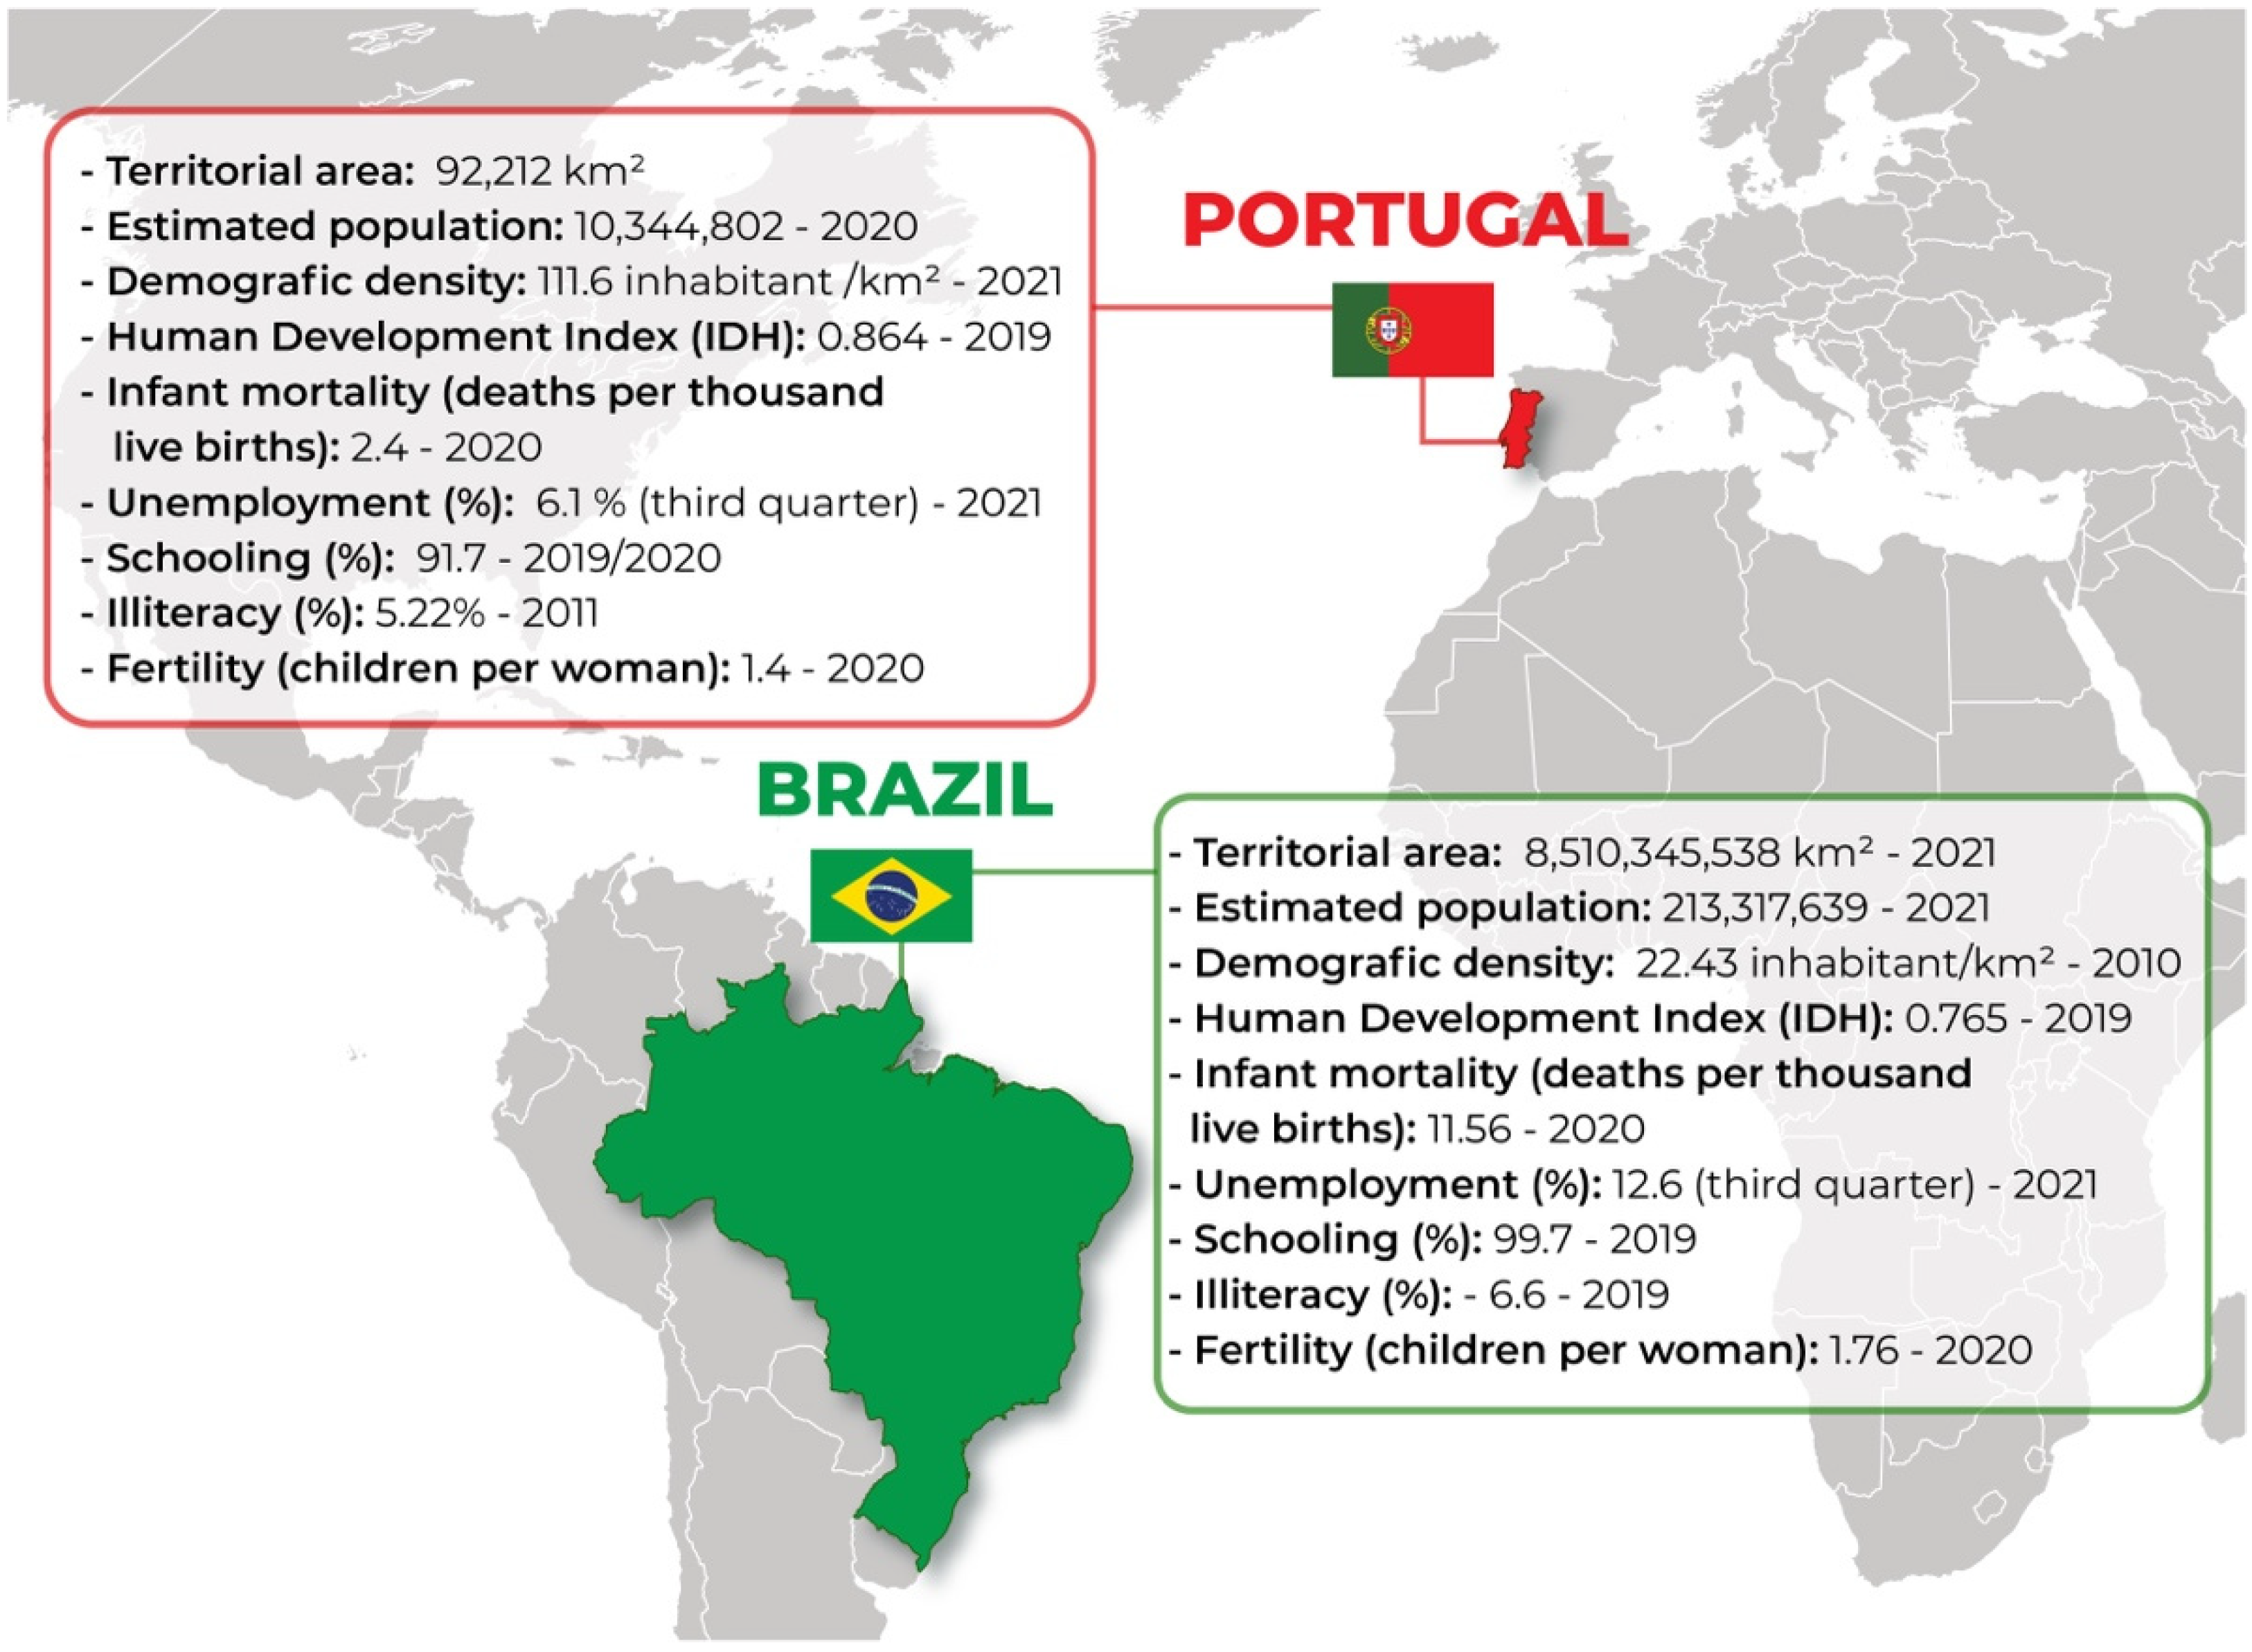 IJERPH | Free Full-Text | Clinical Protocols and Treatment Guidelines for  the Management of Maternal and Congenital Syphilis in Brazil and Portugal:  Analysis and Comparisons: A Narrative Review